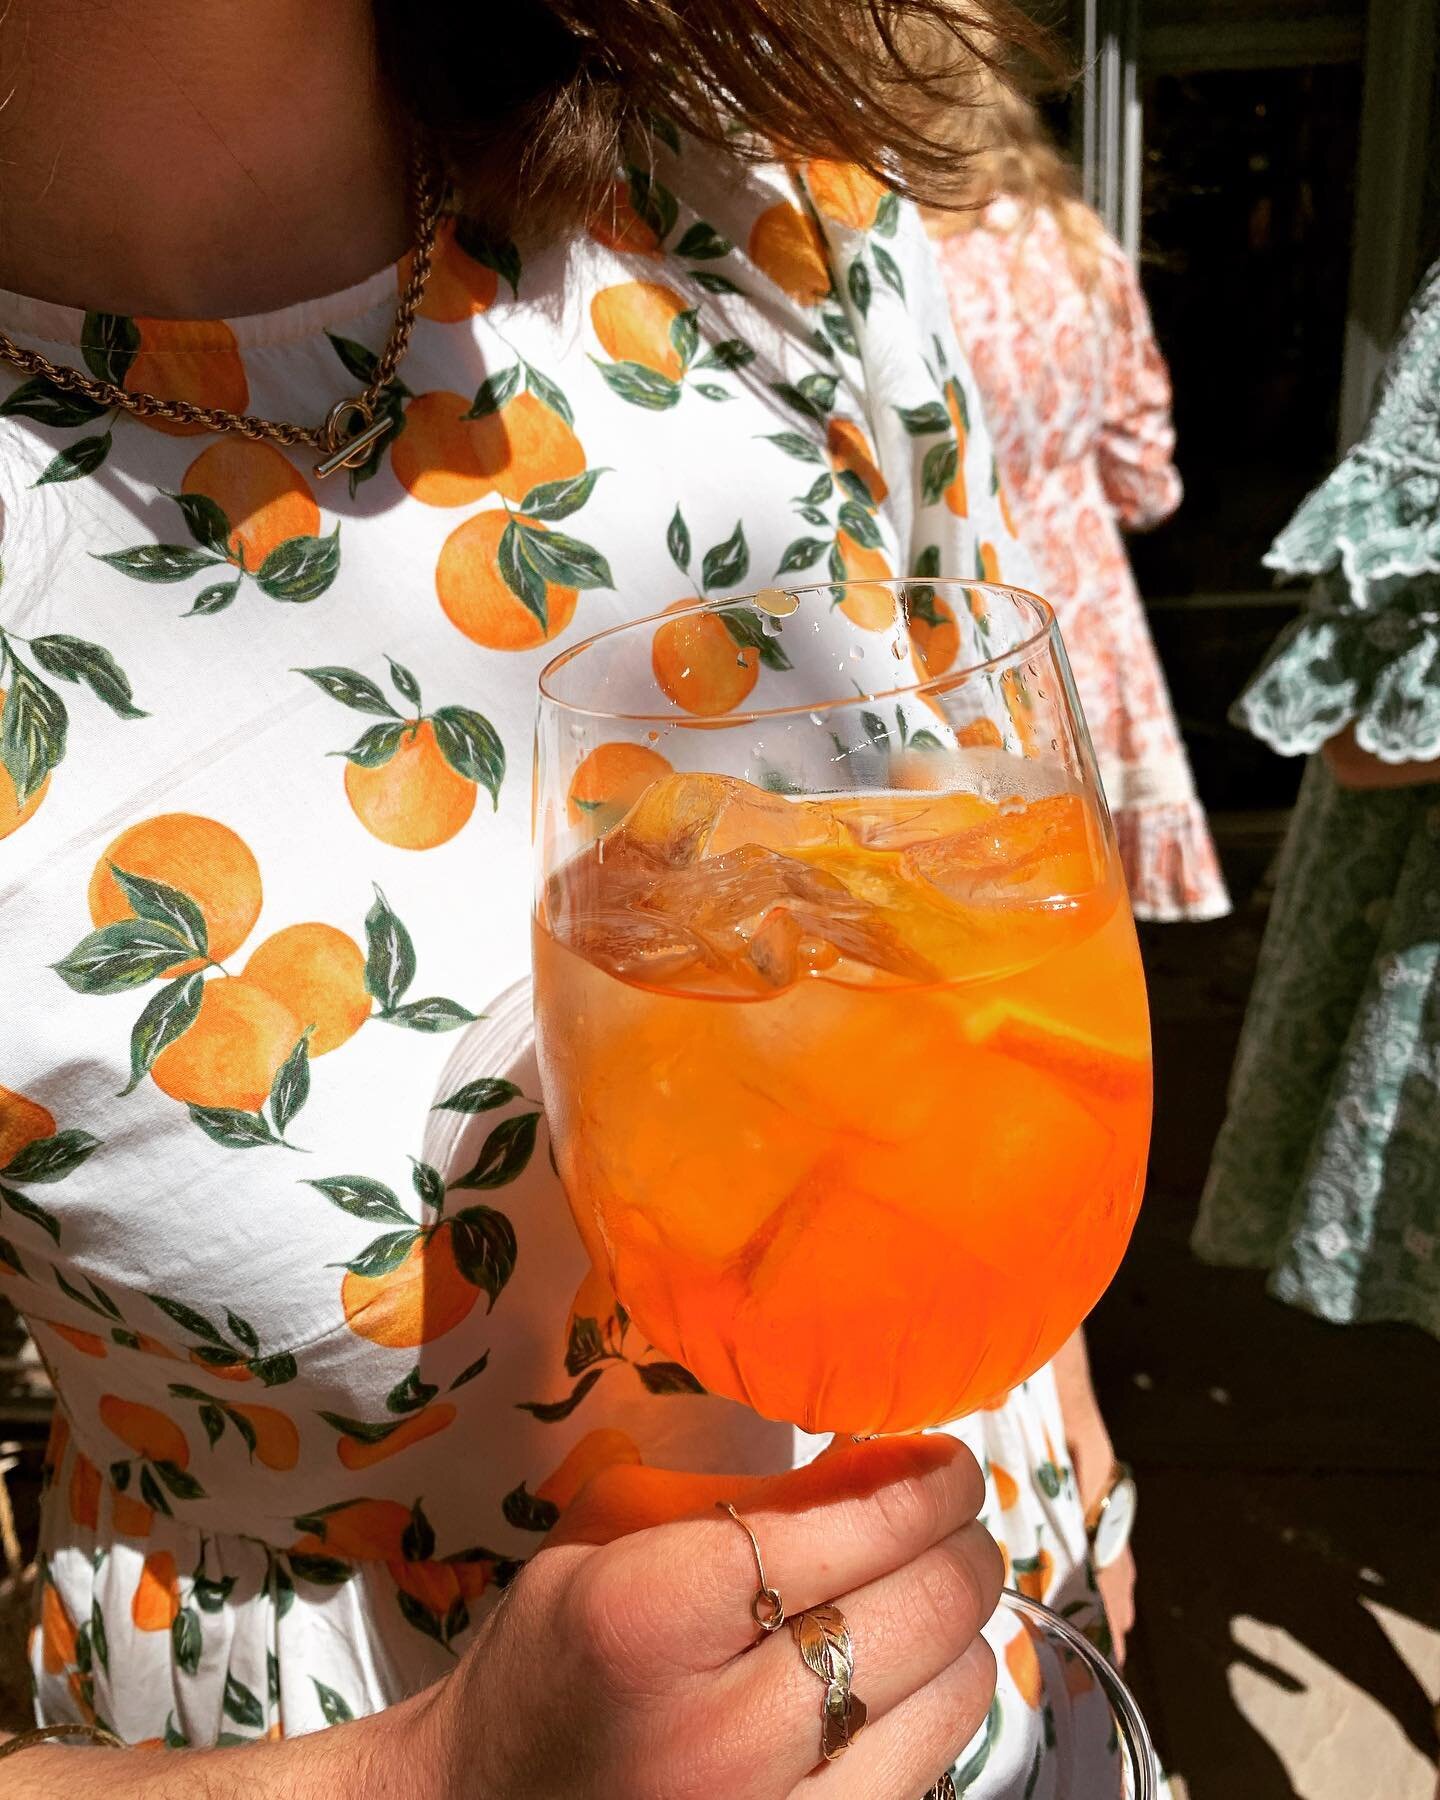 Cheers to the long weekend! Too early for a coronation spritz? Happy weekend all! Hope you all have best weekend with something fizzy in your hand toasting to our new king 👑#coronationcocktails #aperolspritz #aperolspritztime #bankholidayweekend  #c